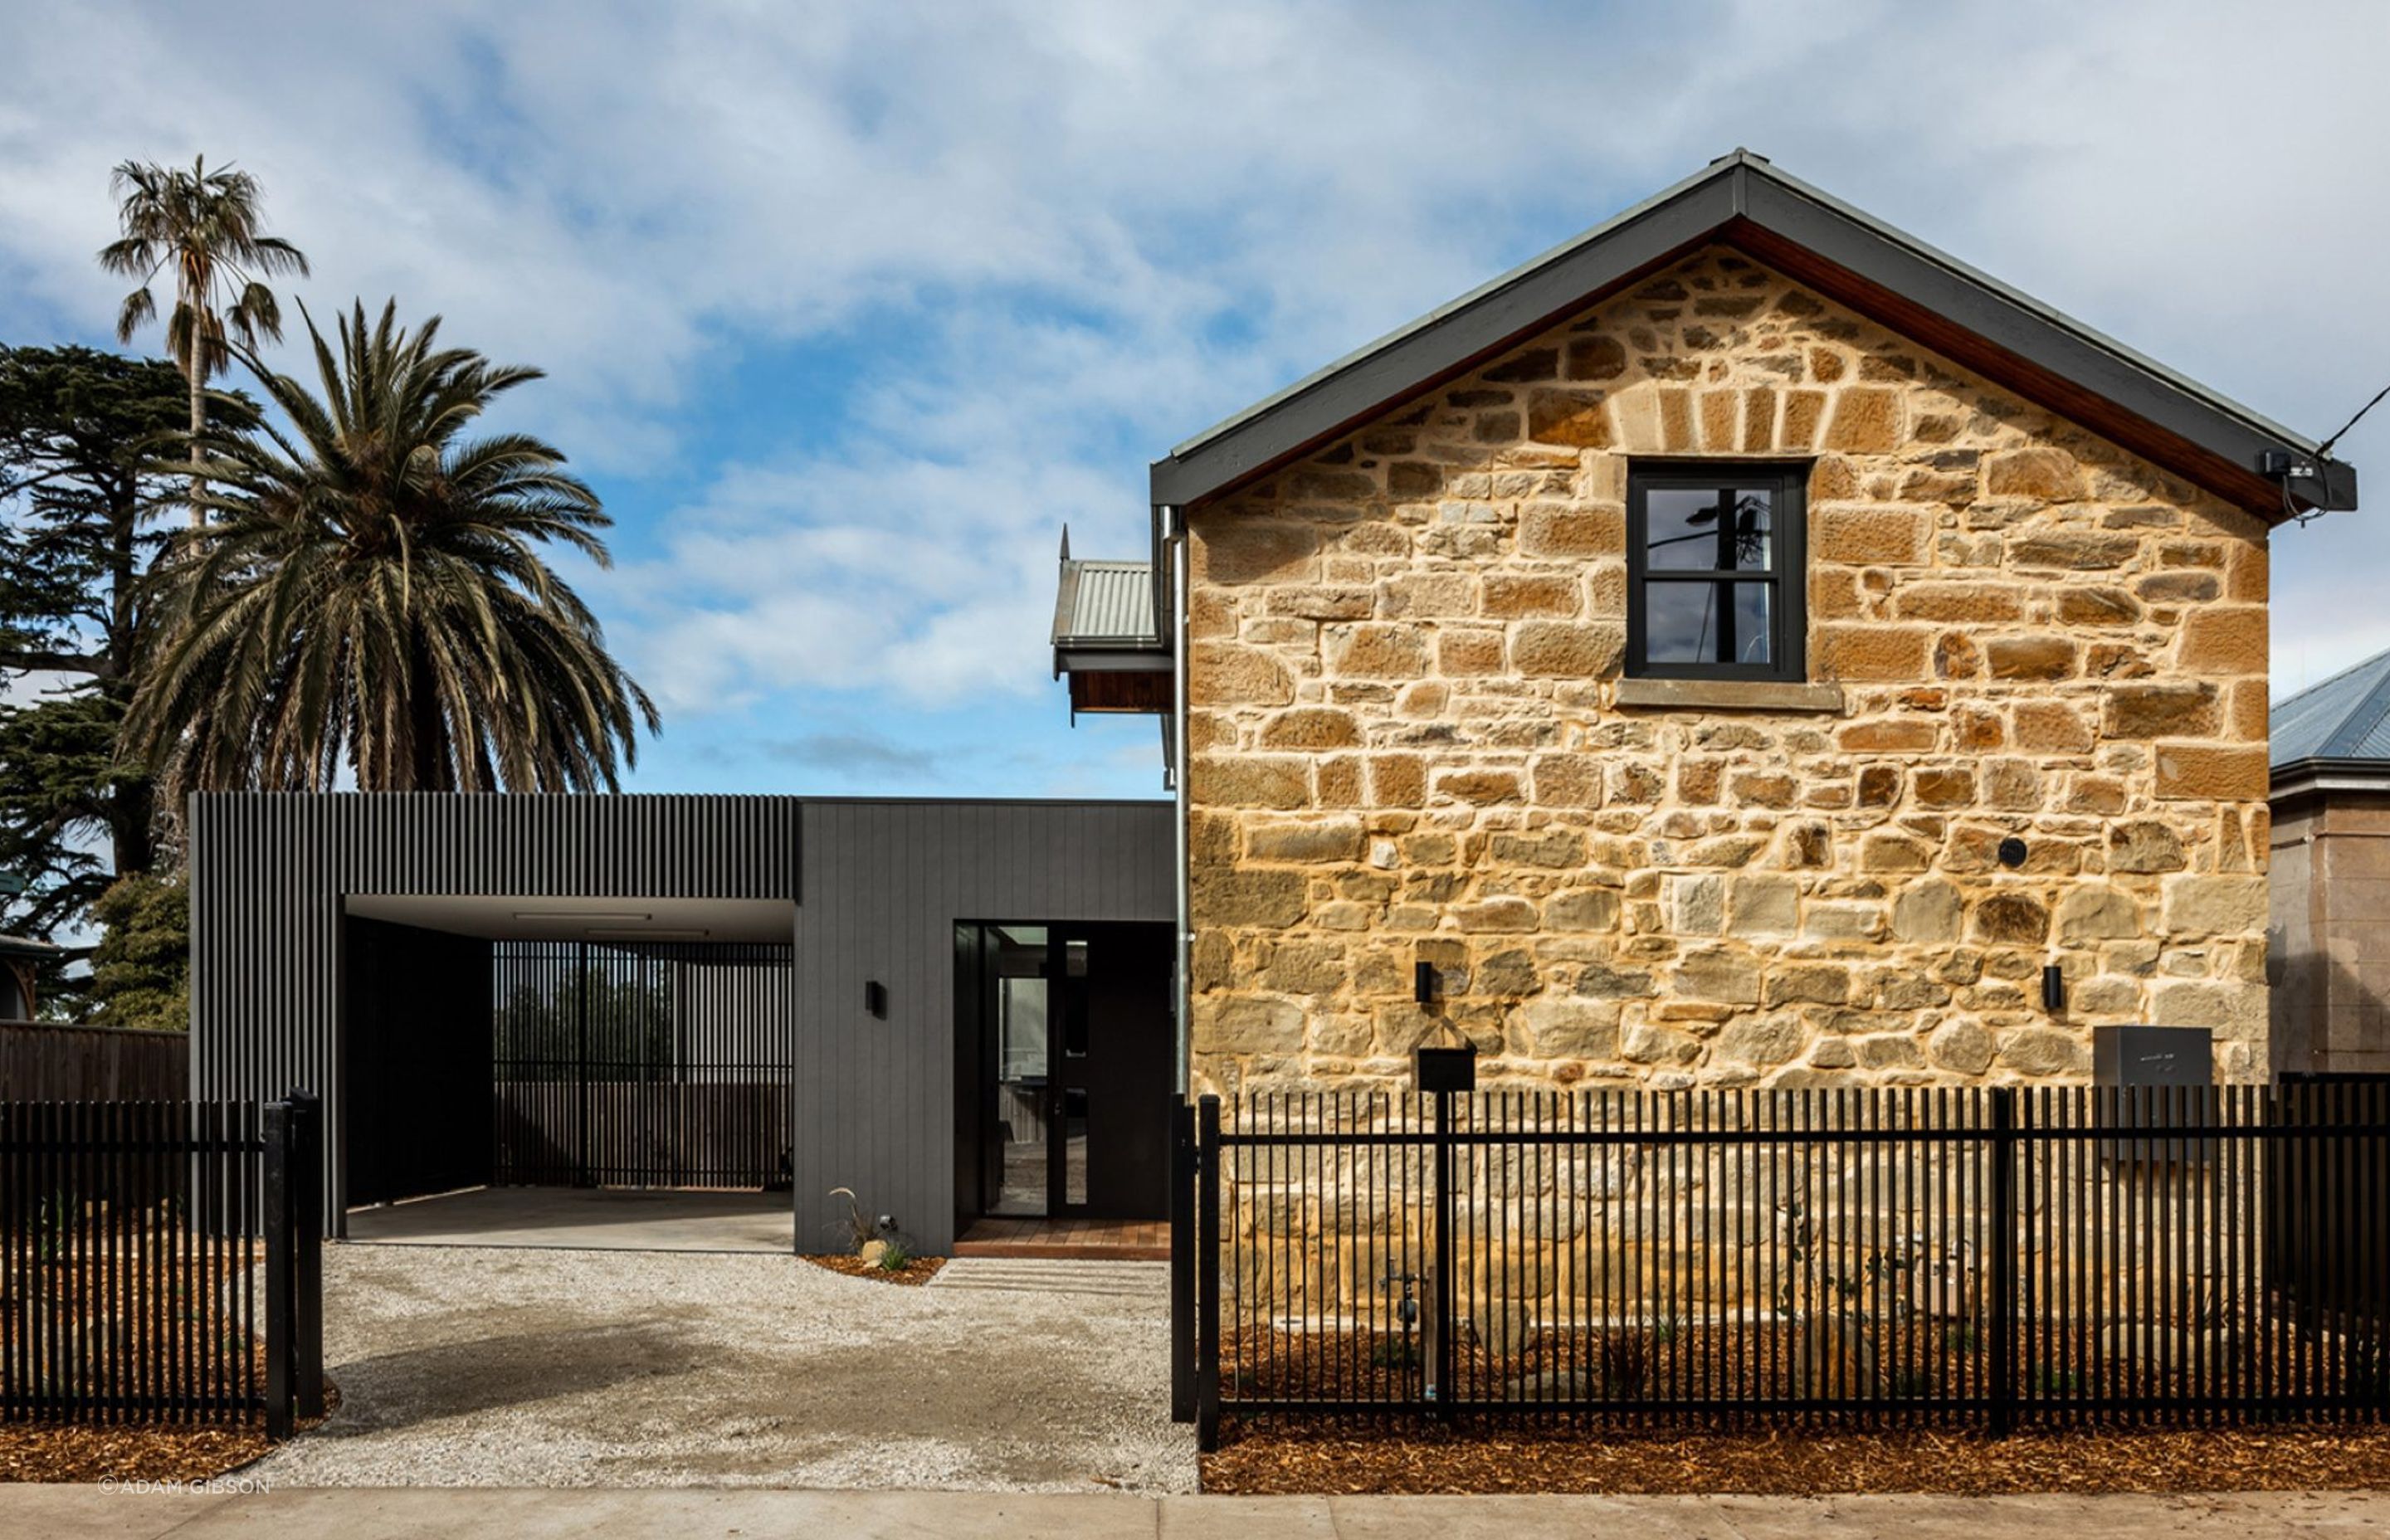 This Bendigo home explores heritage and adaptive design from a new perspective.